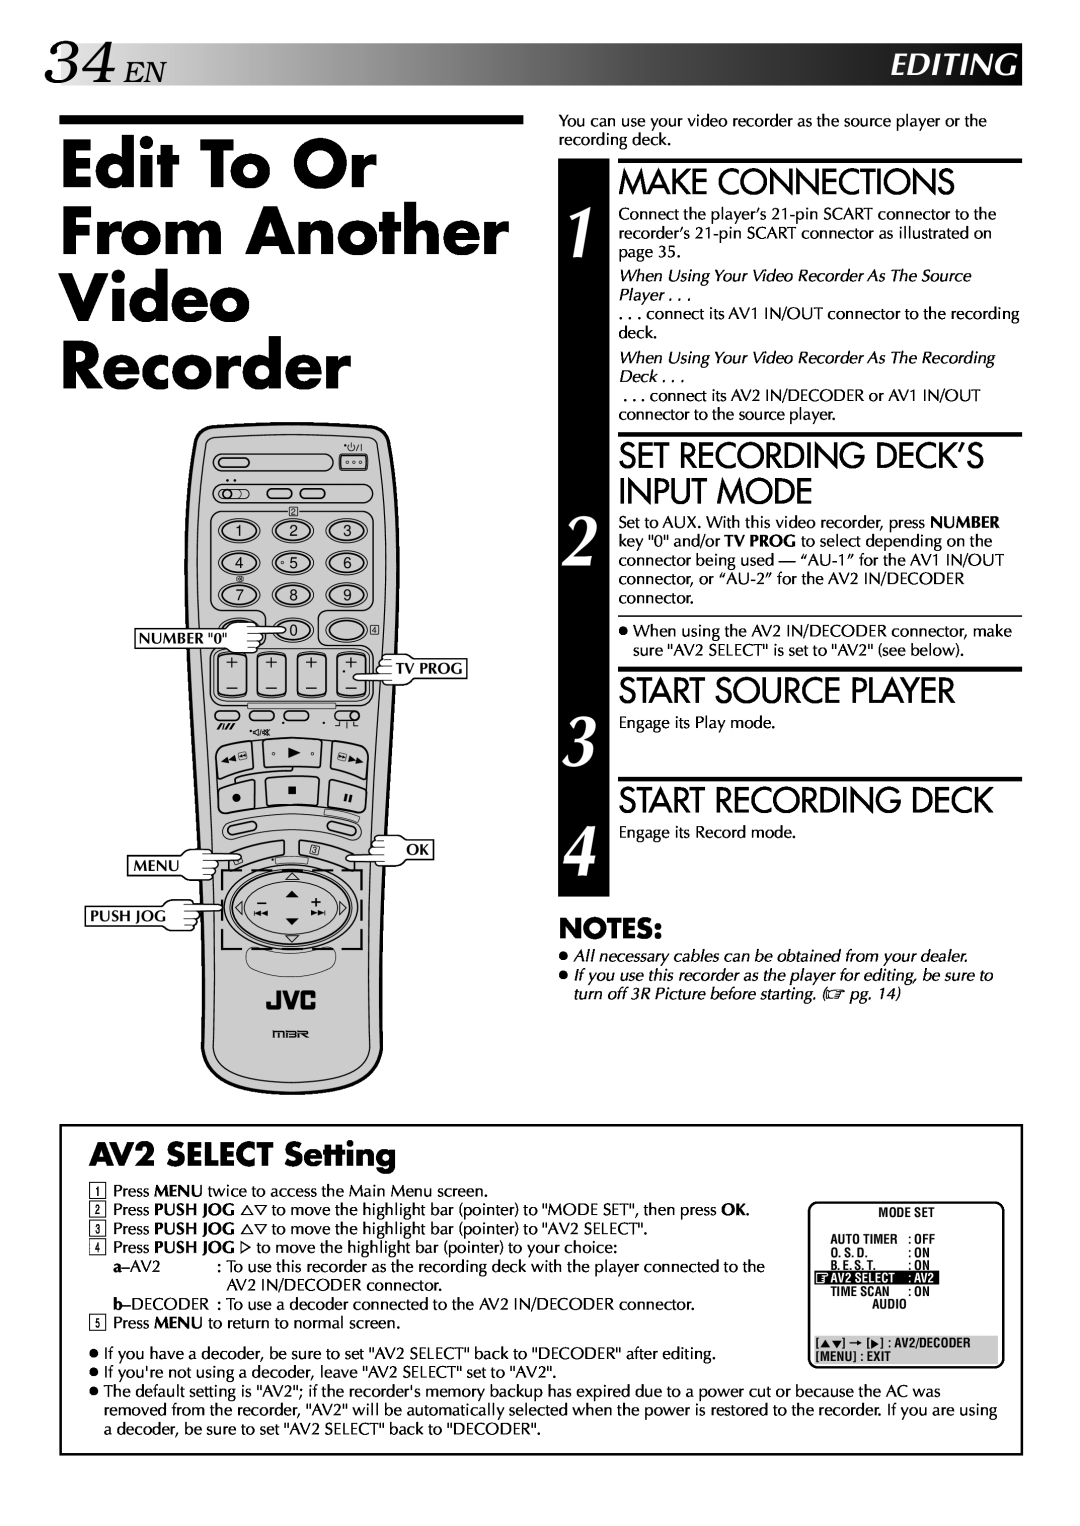 JVC HR-DD848E Edit To Or From Another Video Recorder, 34EN, Make Connections, Set Recording Deck’S Input Mode, Editing 